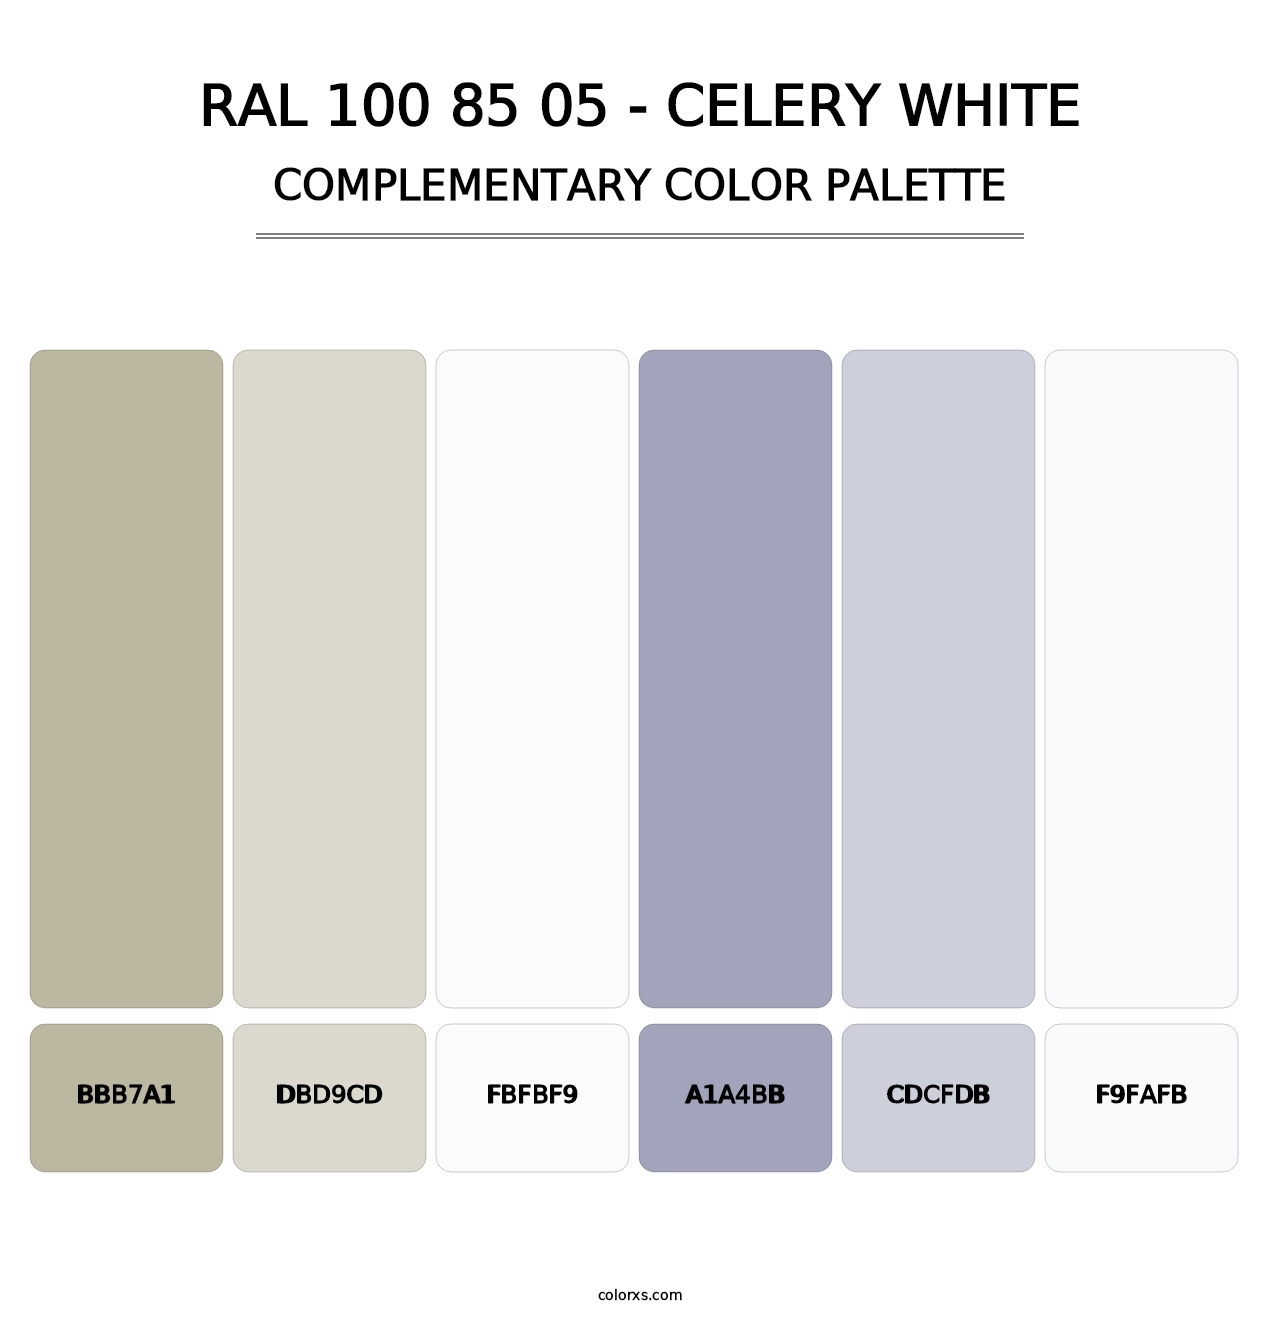 RAL 100 85 05 - Celery White - Complementary Color Palette